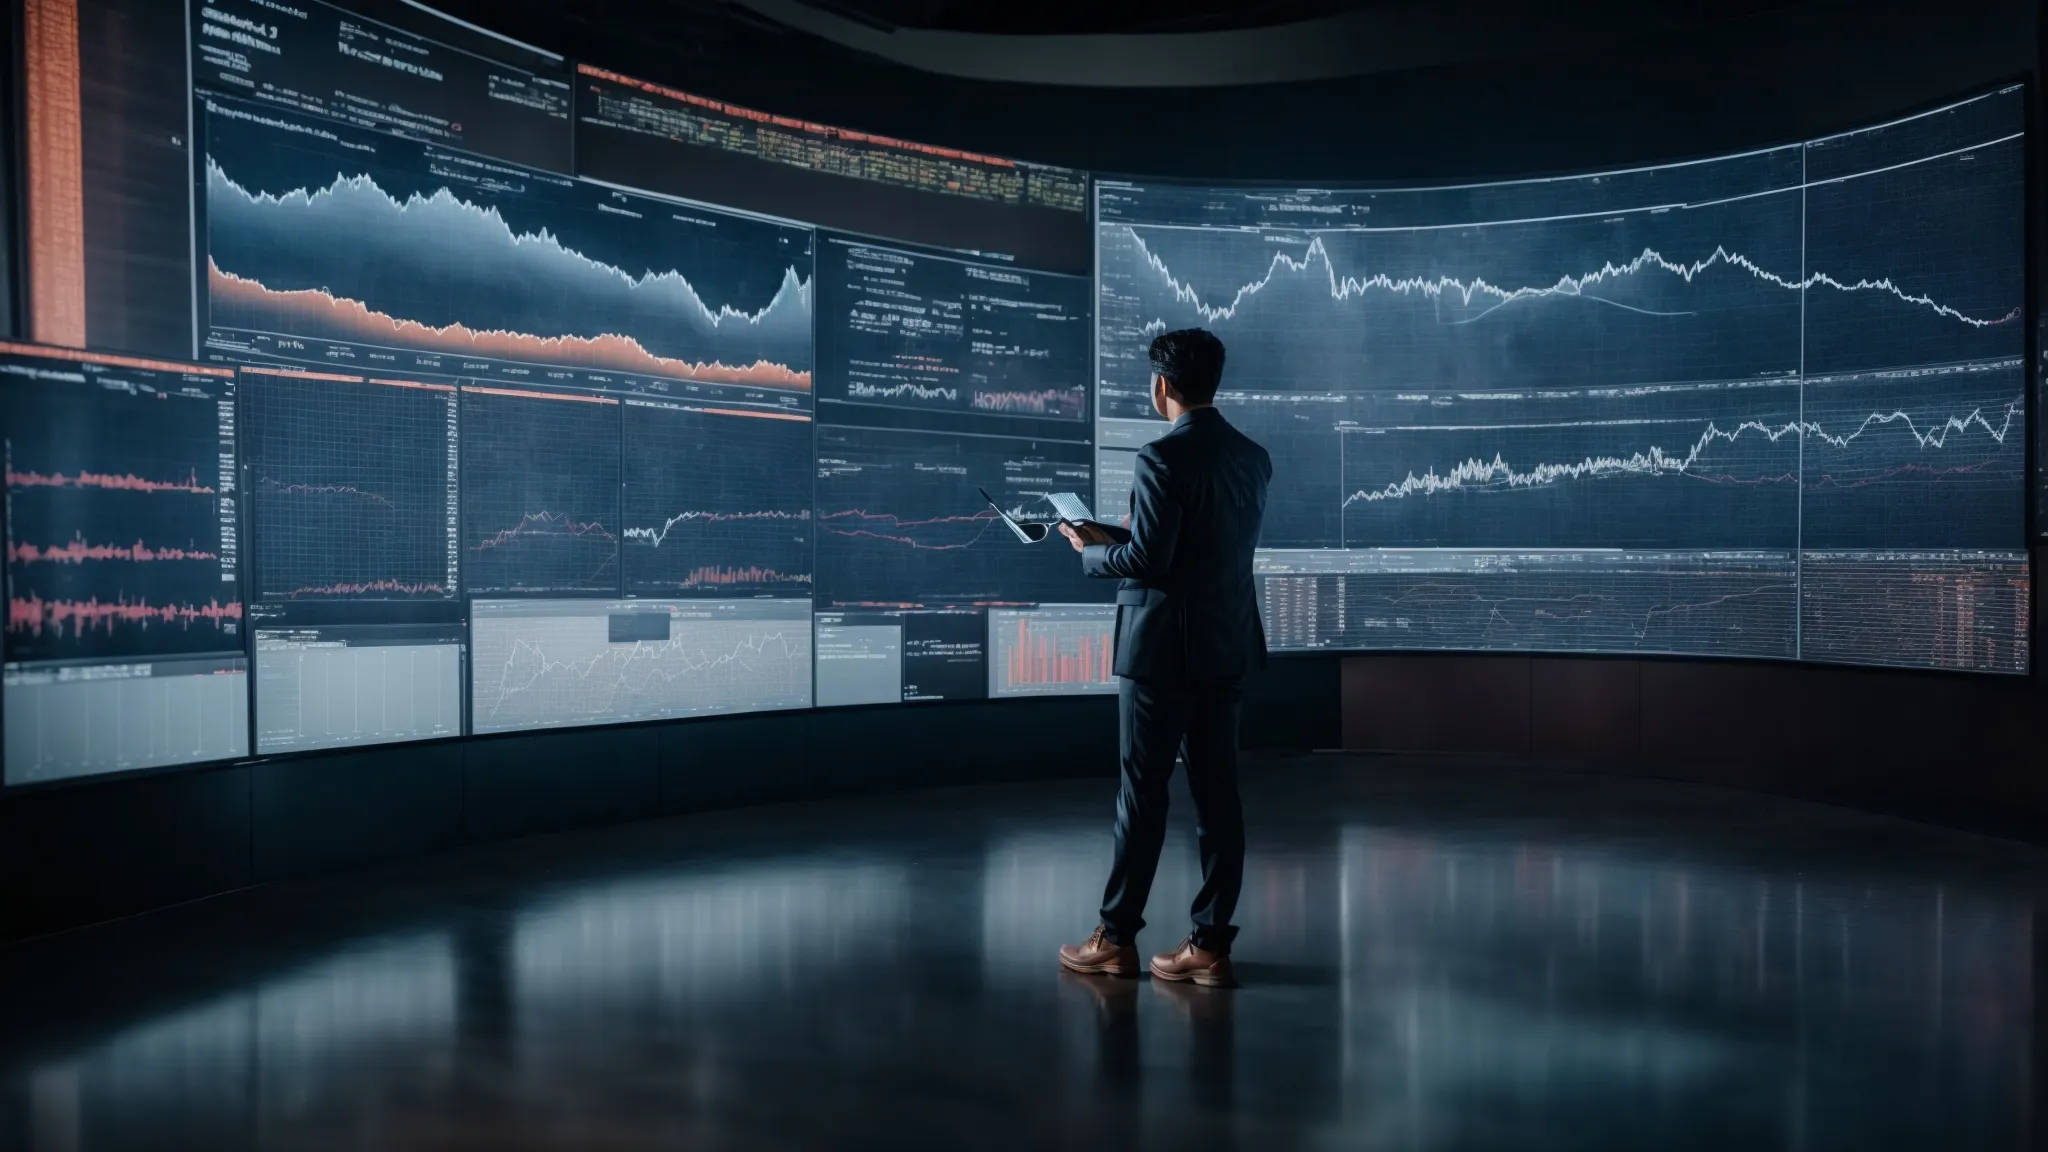 a person examining data analytics on a large screen with digital marketing graphs and website traffic statistics.